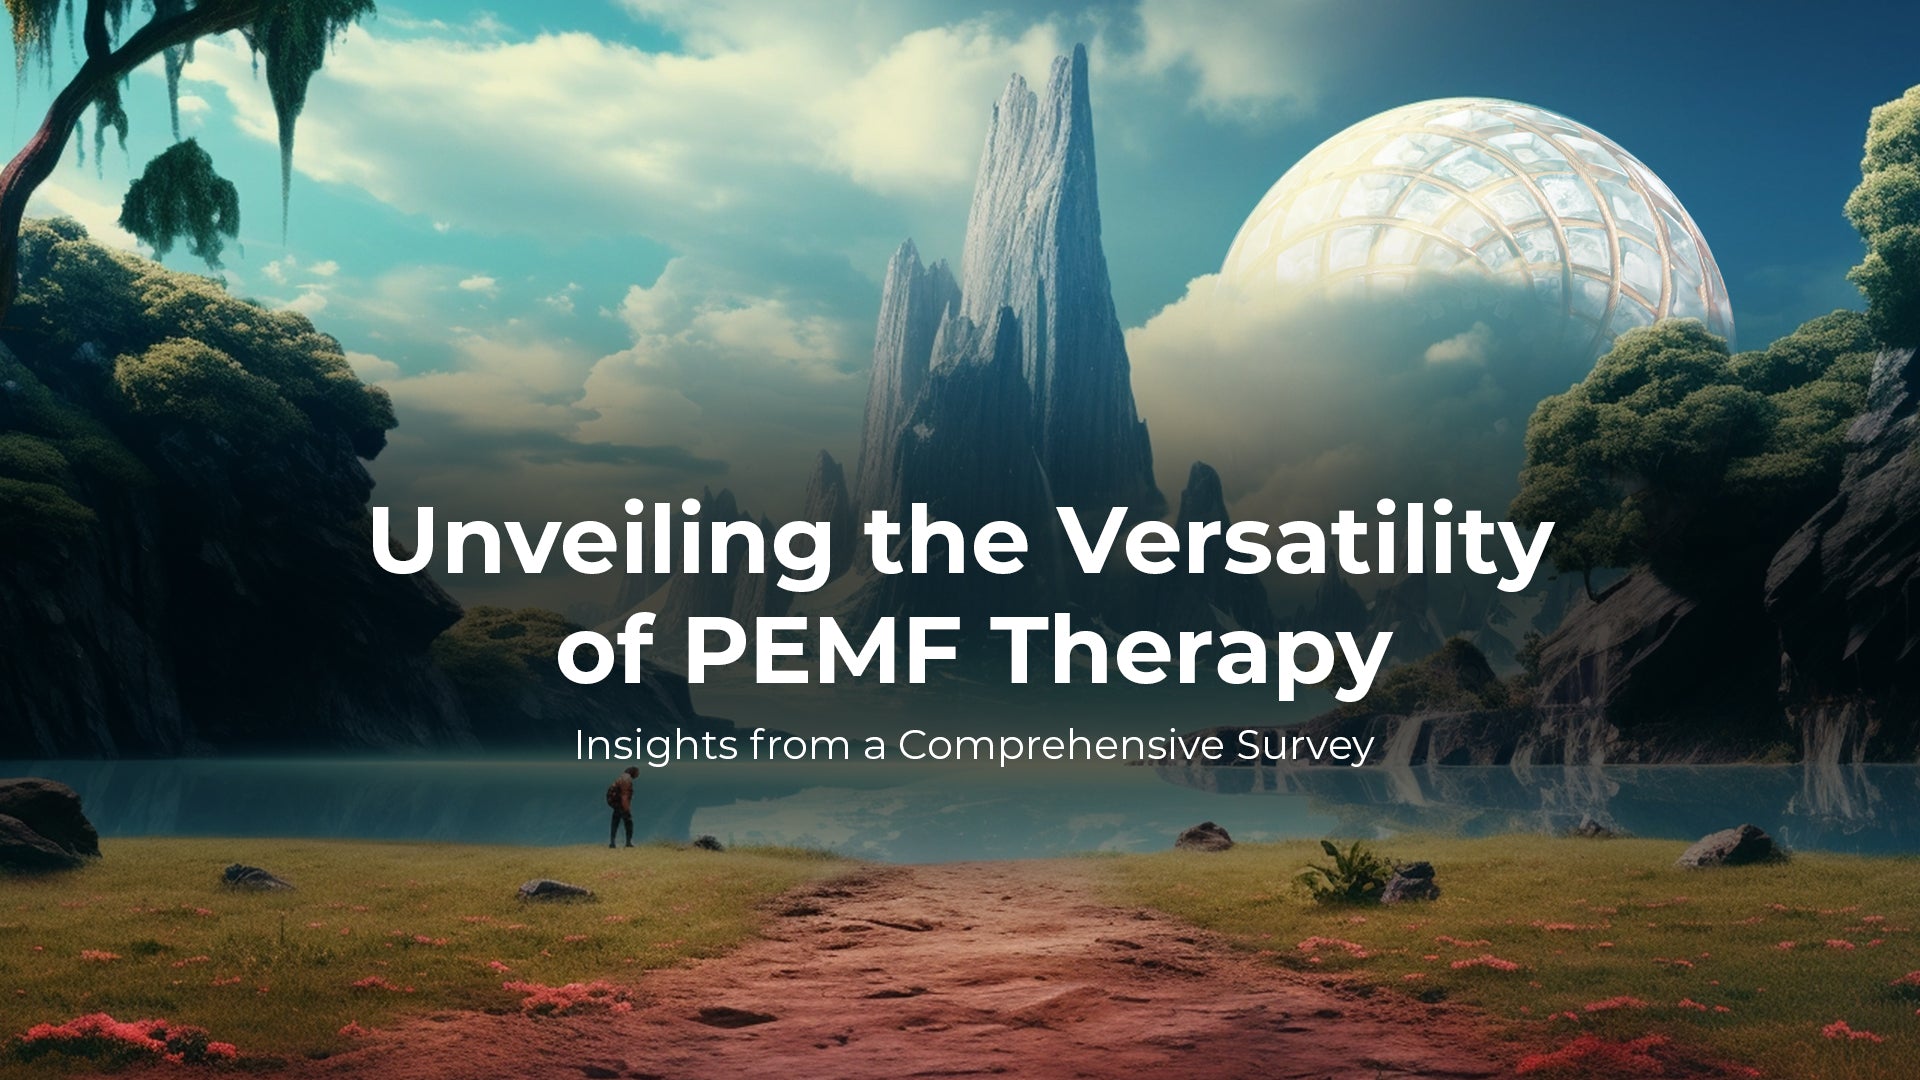 Unveiling the Versatility of PEMF Therapy: Insights from a Comprehensive Survey